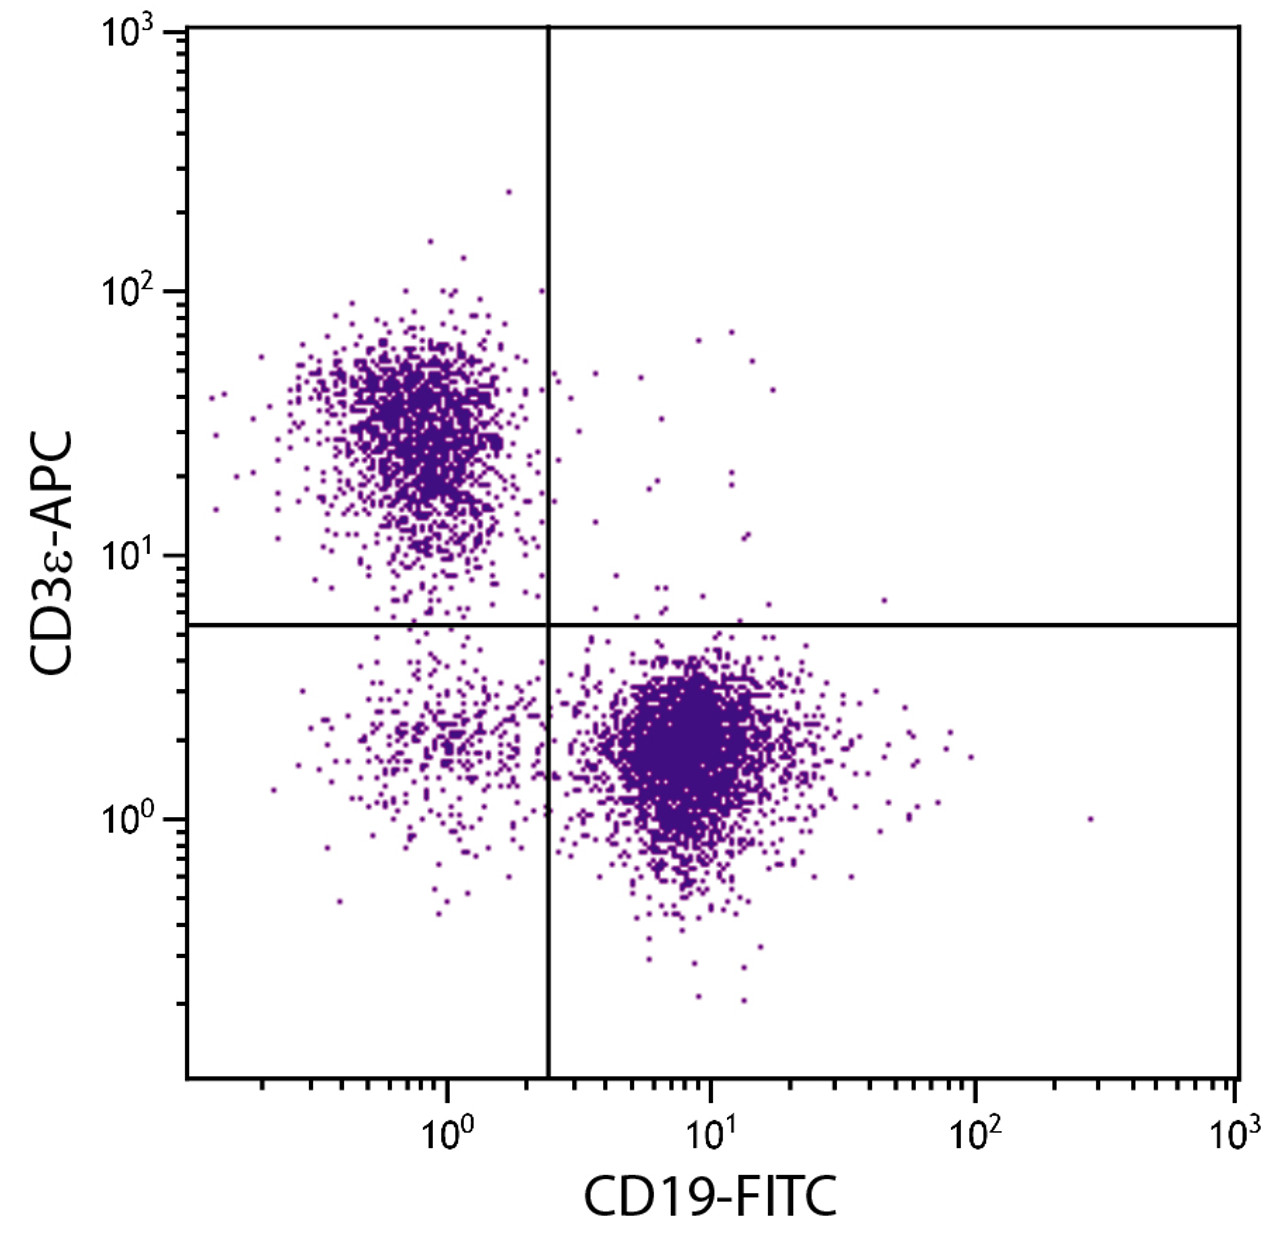 BALB/c mouse splenocytes were stained with Rat Anti-Mouse CD3?-APC (Cat. No. 98-579) and Rat Anti-Mouse CD19-FITC .